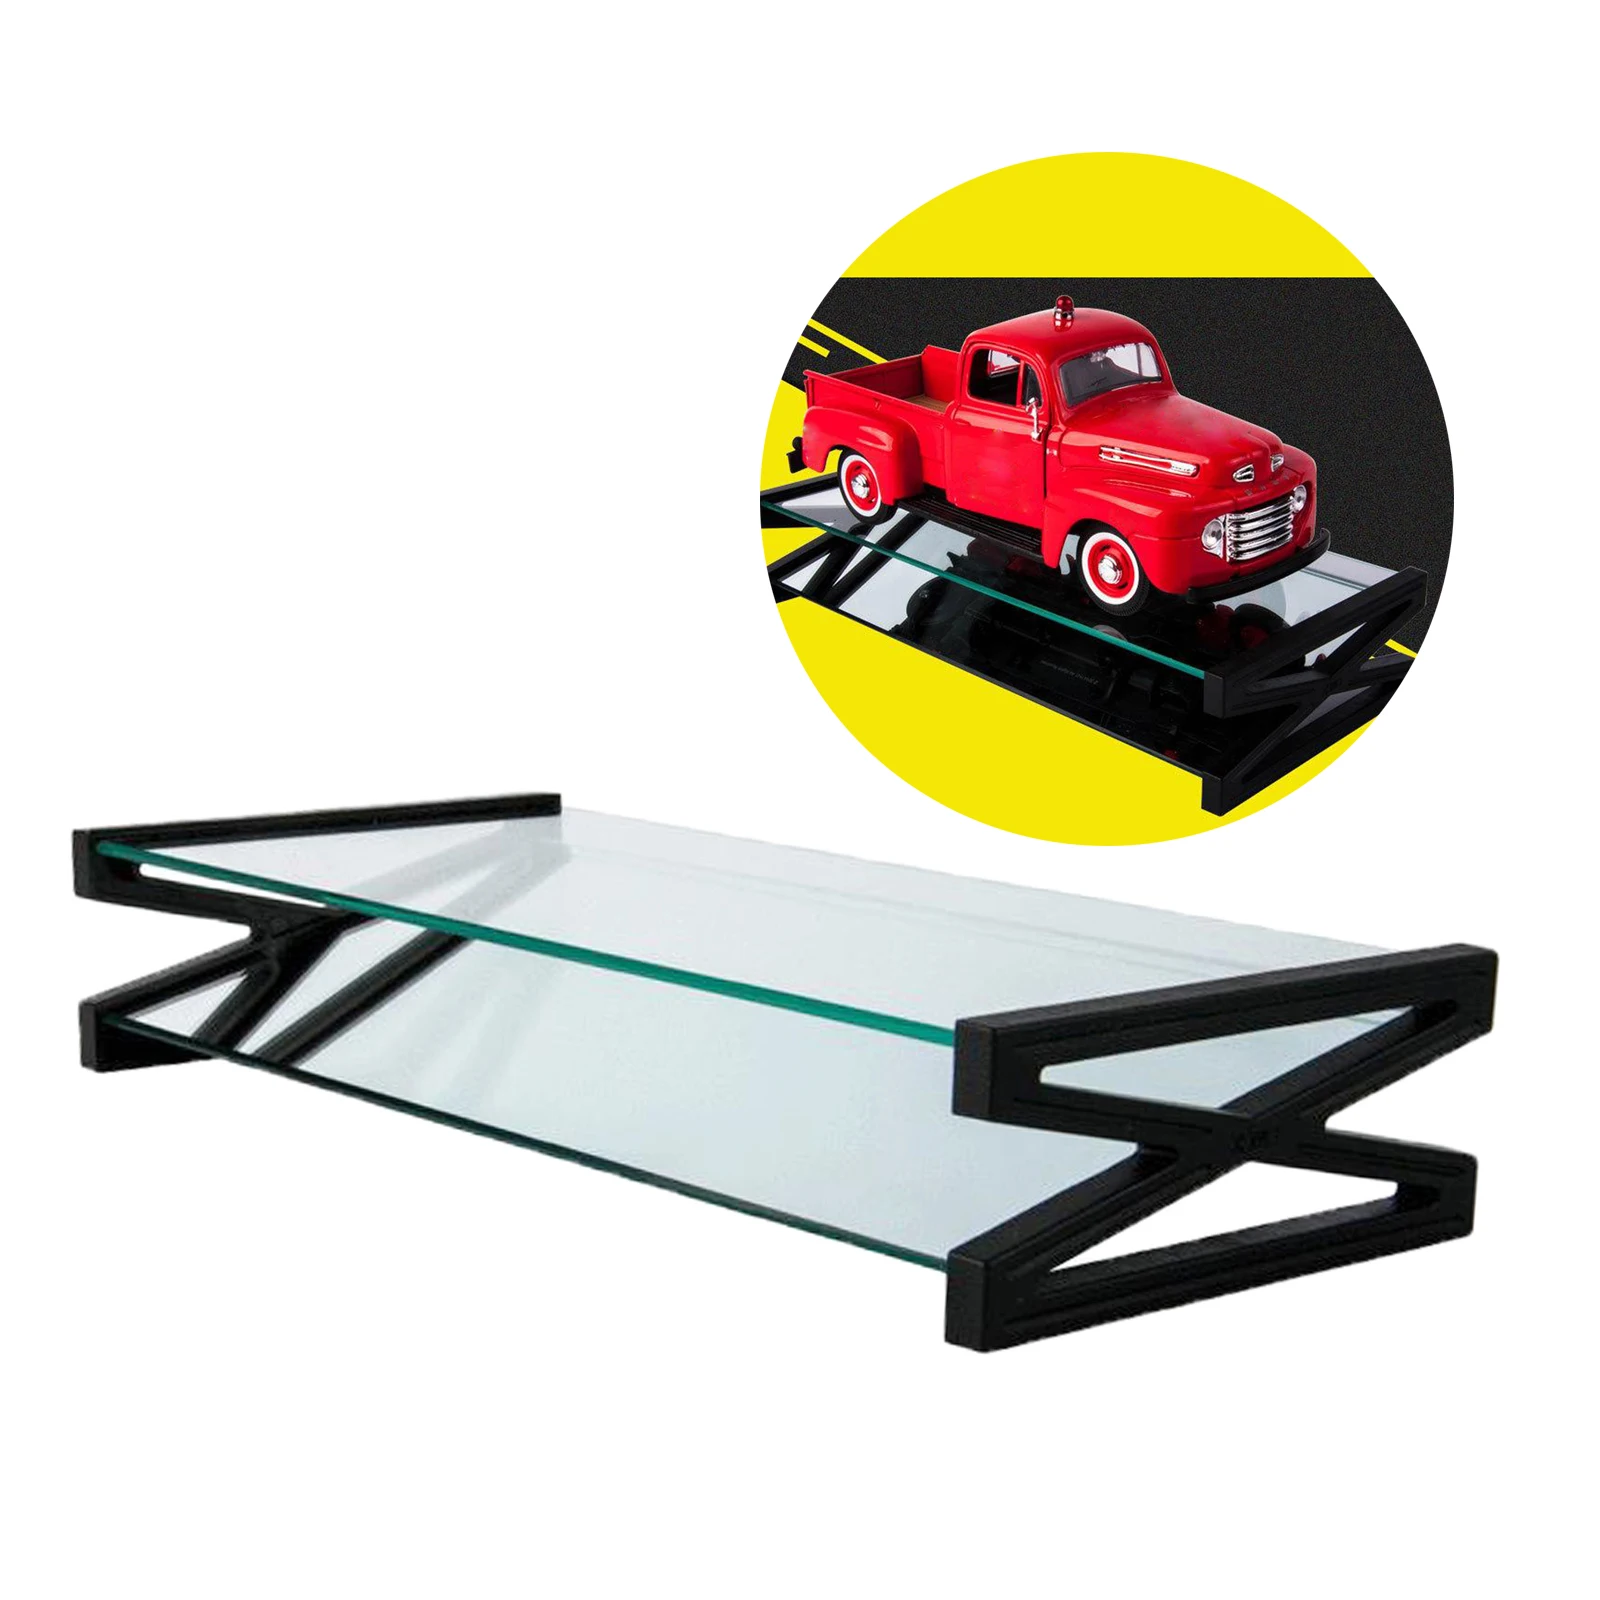 1:18 Scale Transparent Display Stand Base Case for Model Cars Action Figures